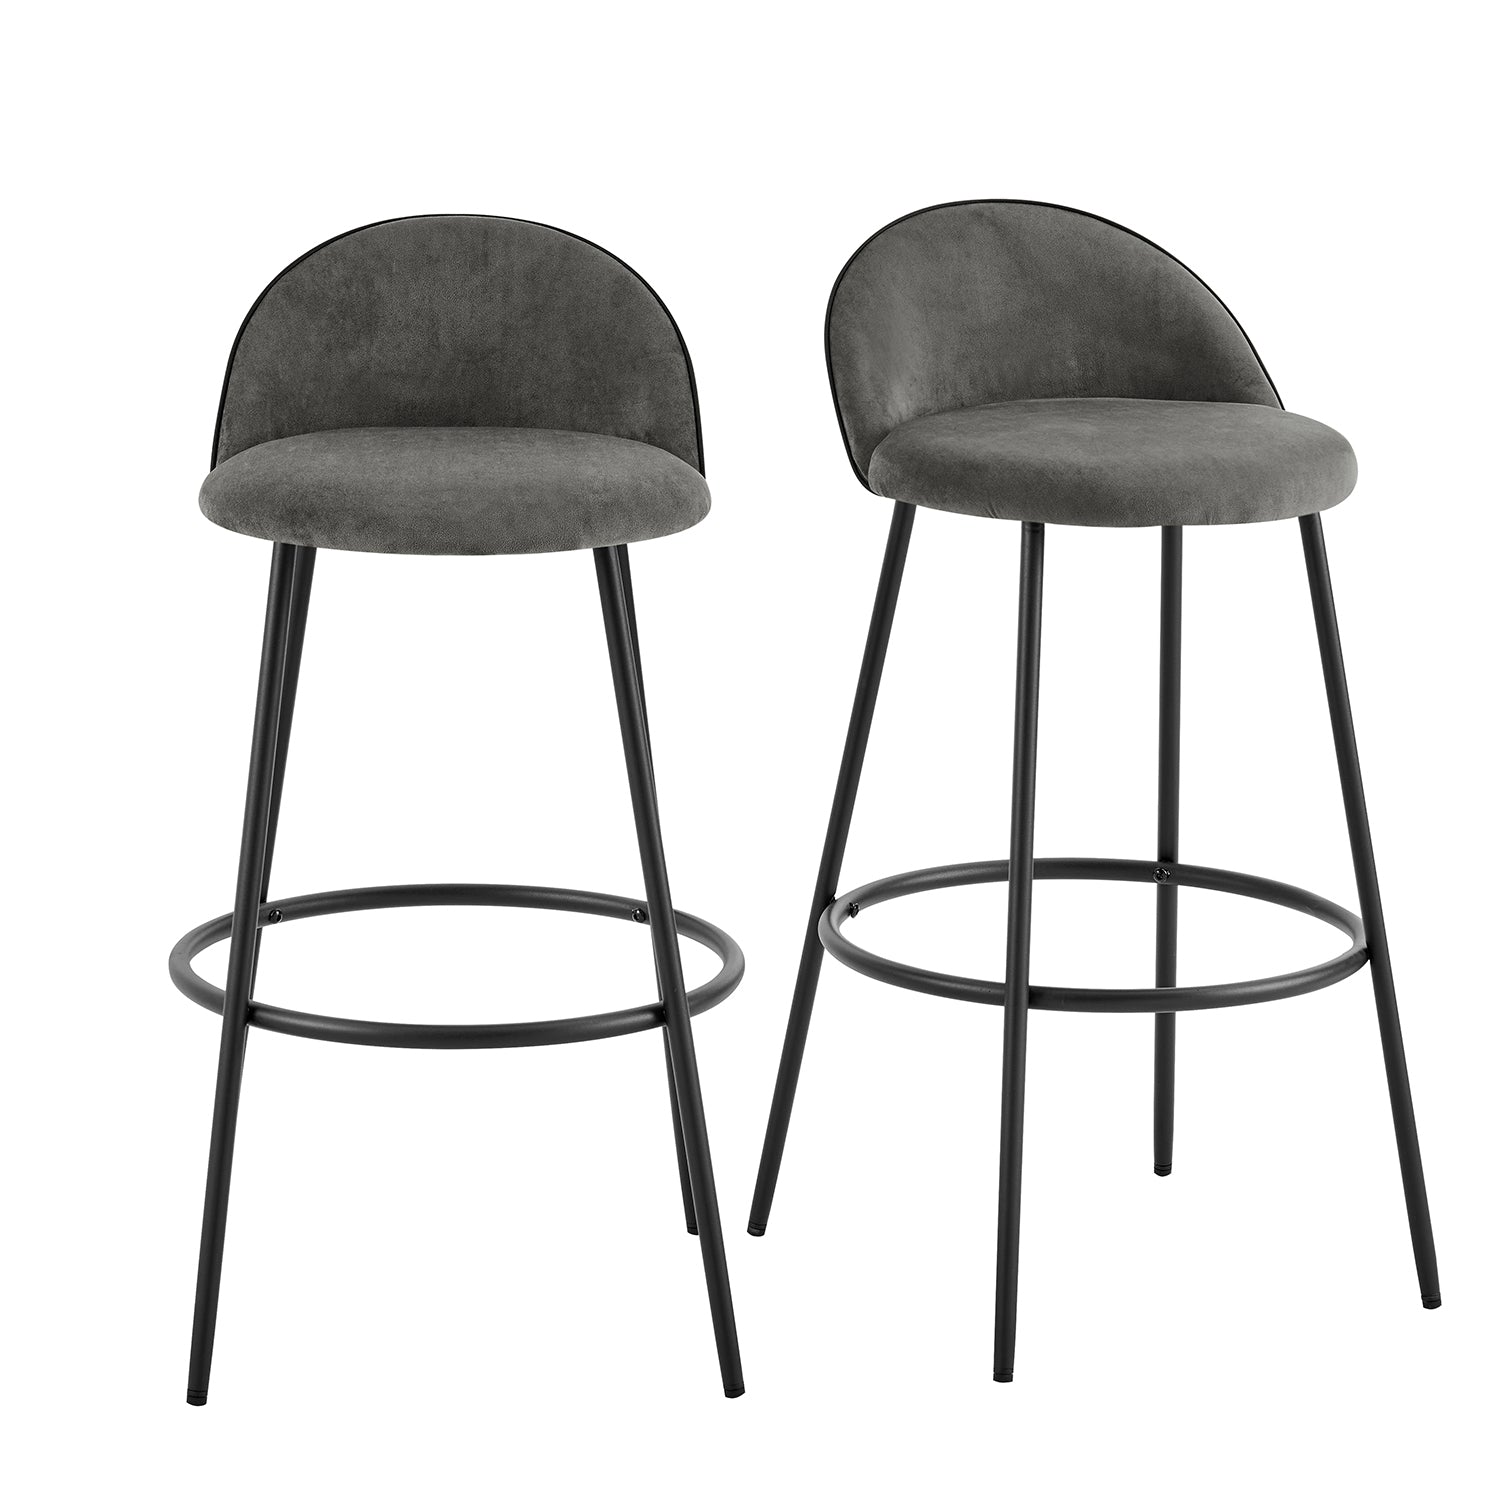 Barton Set of 2 Grey Velvet Upholstered Bar Stools with Contrast Piping